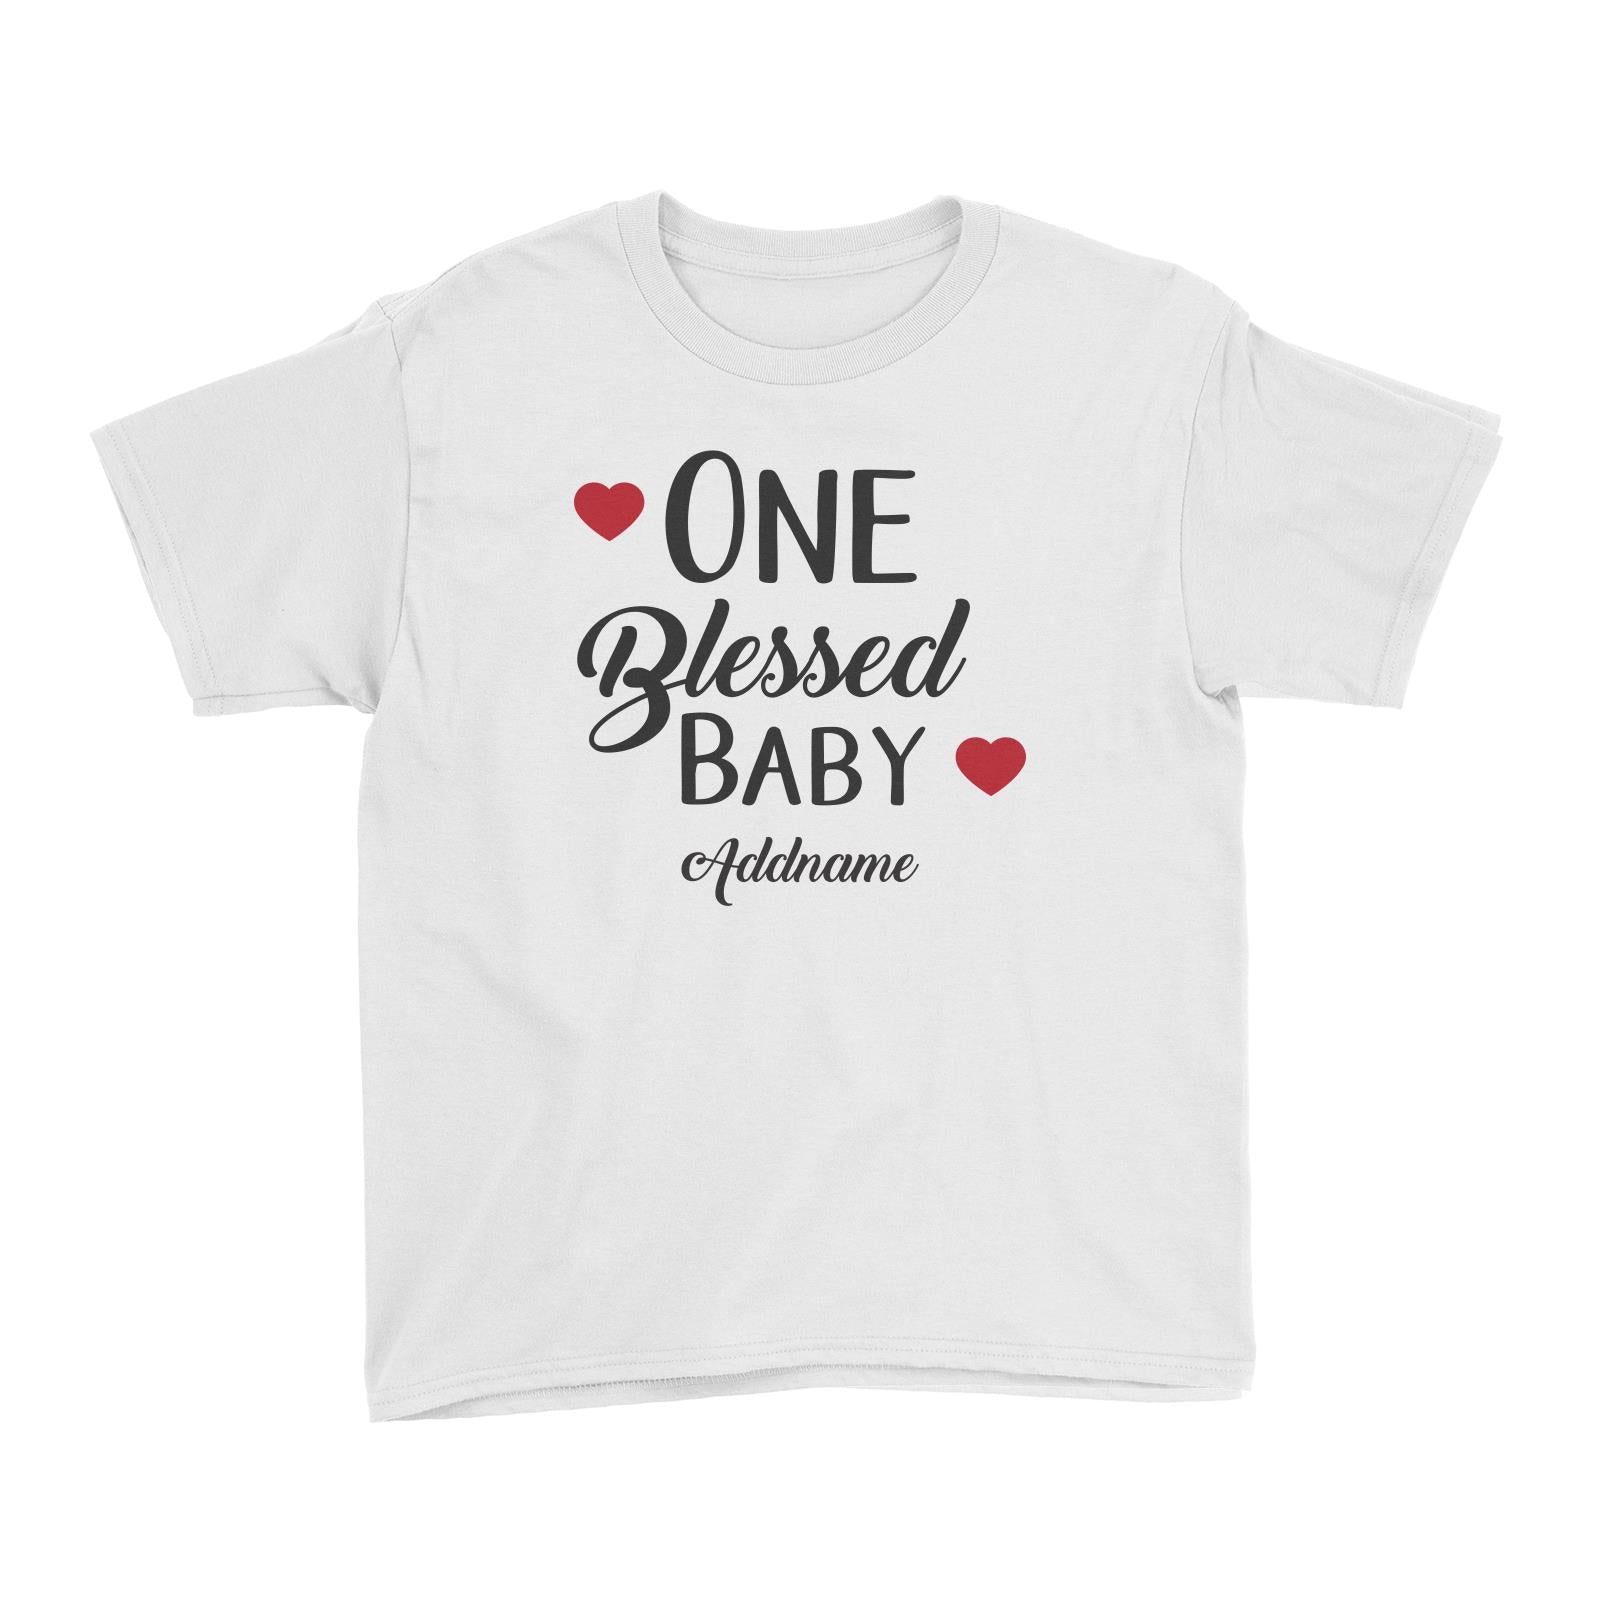 Christian Series One Blessed Baby Addname Kid's T-Shirt